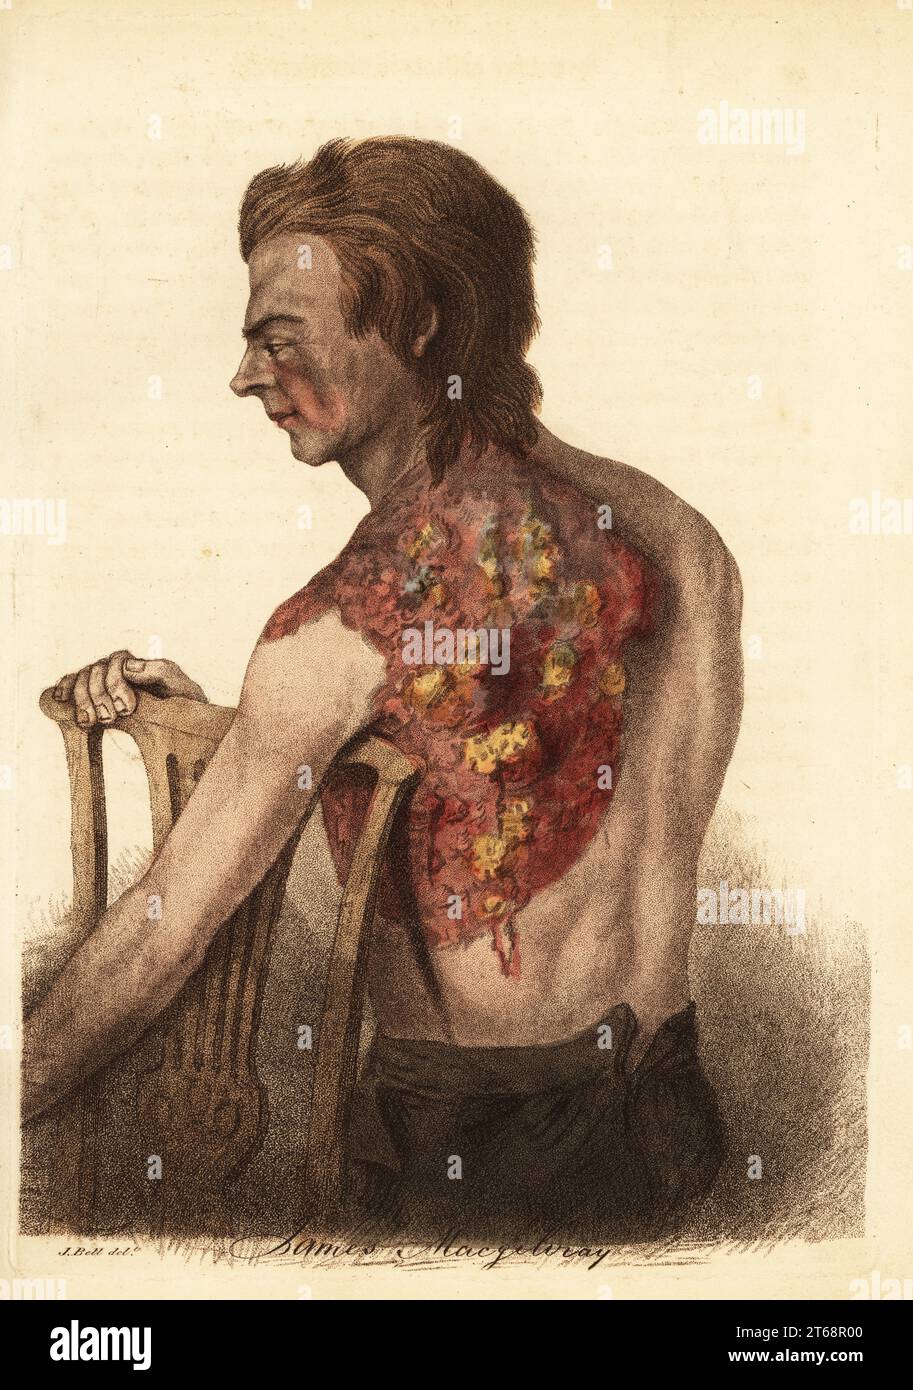 Soldier with an abscess from a gunshot wound to the shoulder. Sergeant M'Gillivray of the 68th (Durham) Regiment was shot in the shoulder in the Siege of Nijmegen, 1794. Entrance wound to the clavicle and exit at the scapula. Captured and imprisoned by the French for three years. Inflamed abscesses and ulcers cover his left shoulder and back. Cured by lancing, bathing and camomile decoction. James MacGilivray. Handcoloured copperplate engraving after an illustration by John Bell from his own Principles of Surgery, as they Relate to Wounds, Ulcers and Fistulas, Longman, Hurst, Rees, Orme and Br Stock Photo